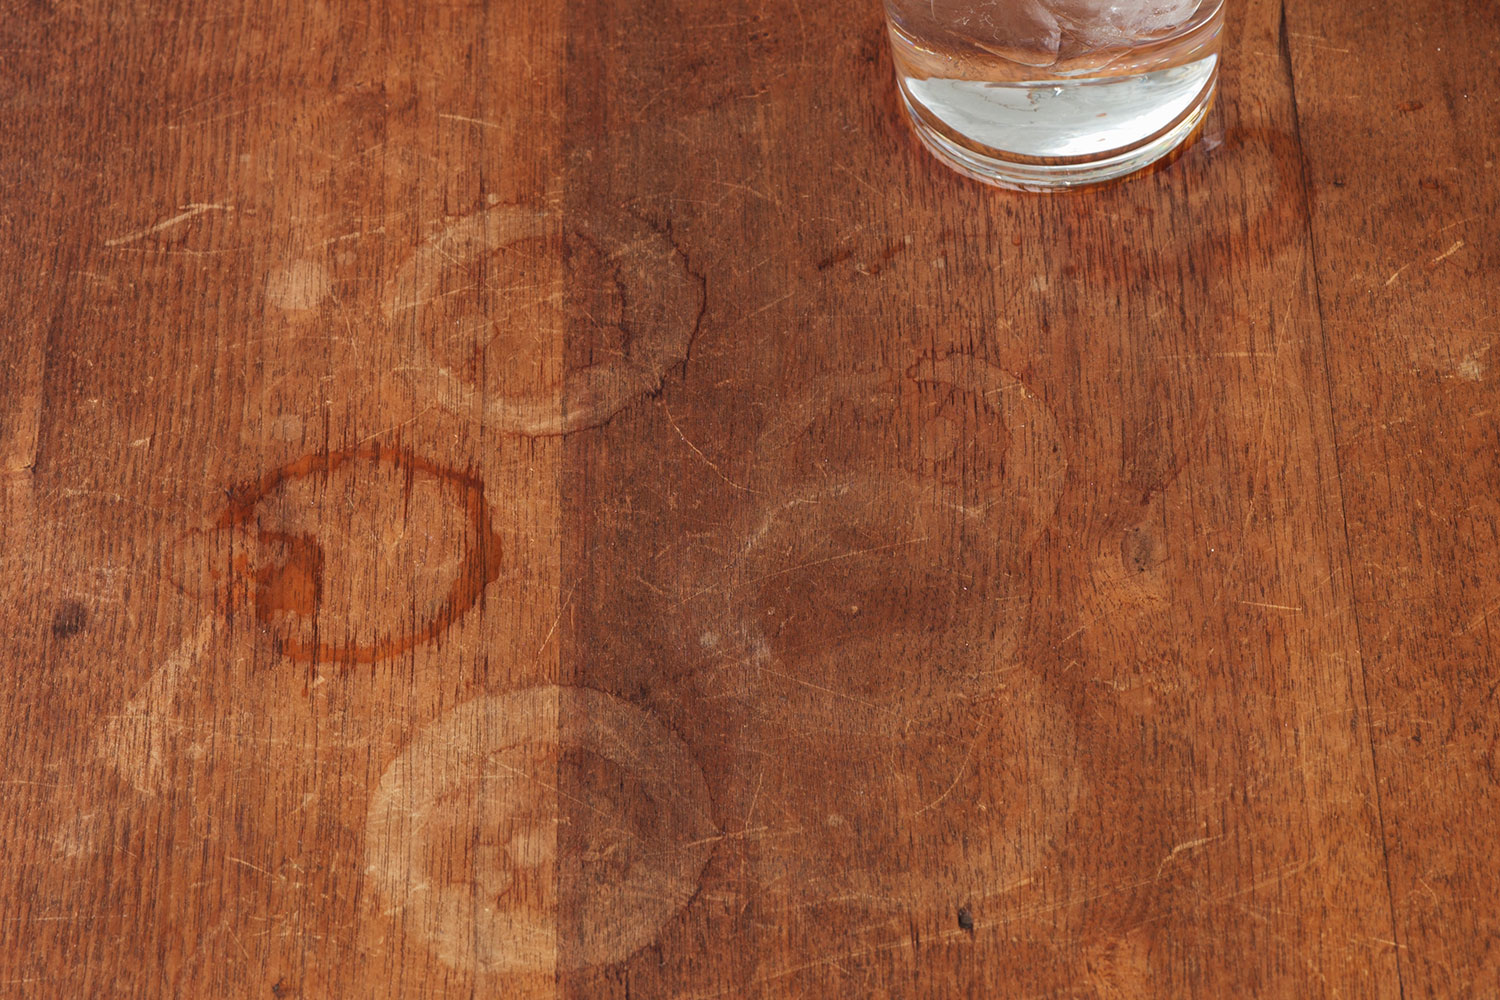 How to remove water stains from wood | Better Homes and ...